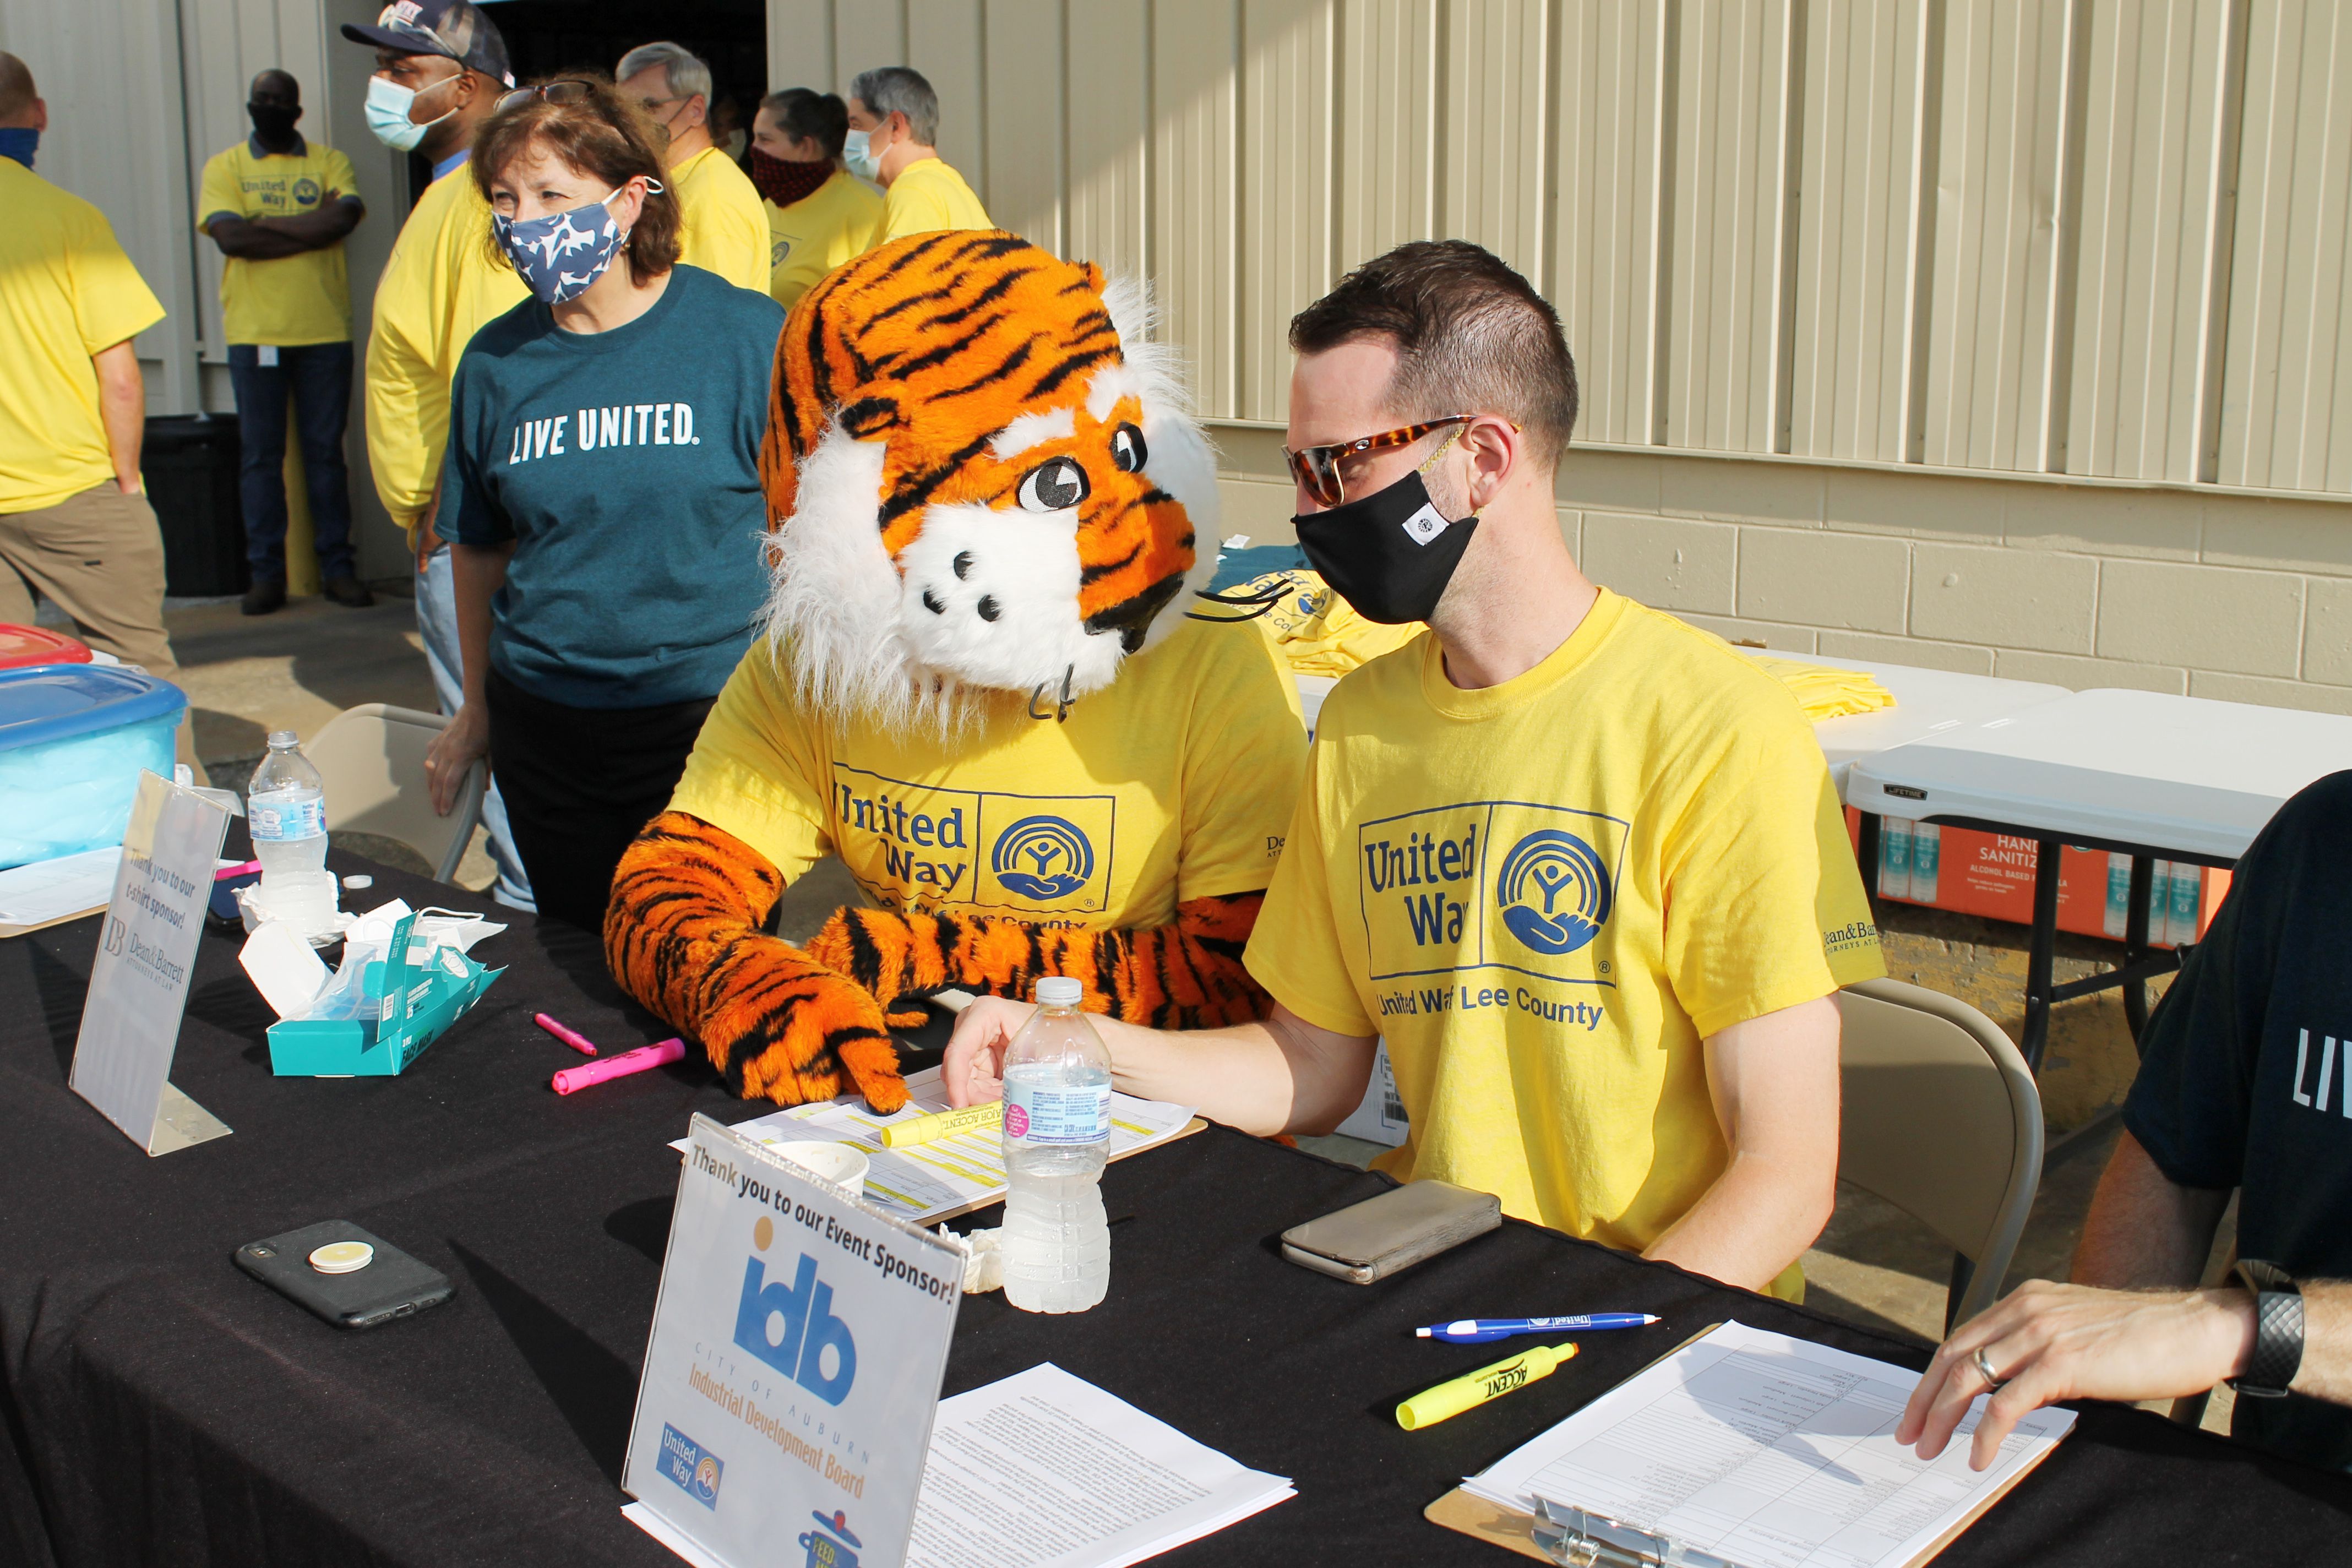 Aubie and a volunteer working the check in table